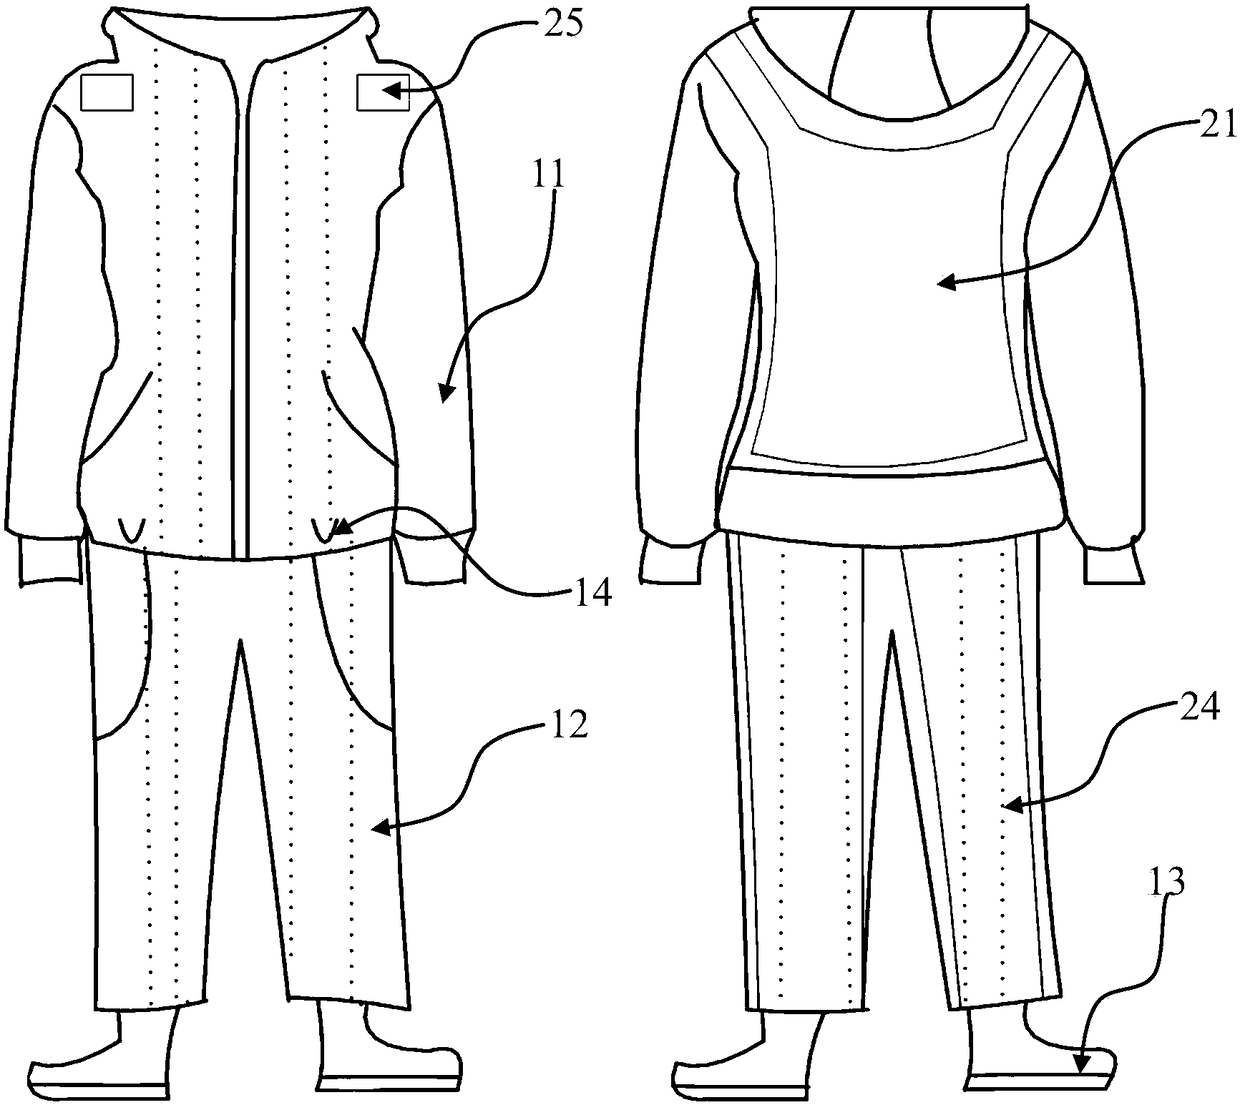 Temperature adjustment functional clothing based on flexible solar panel